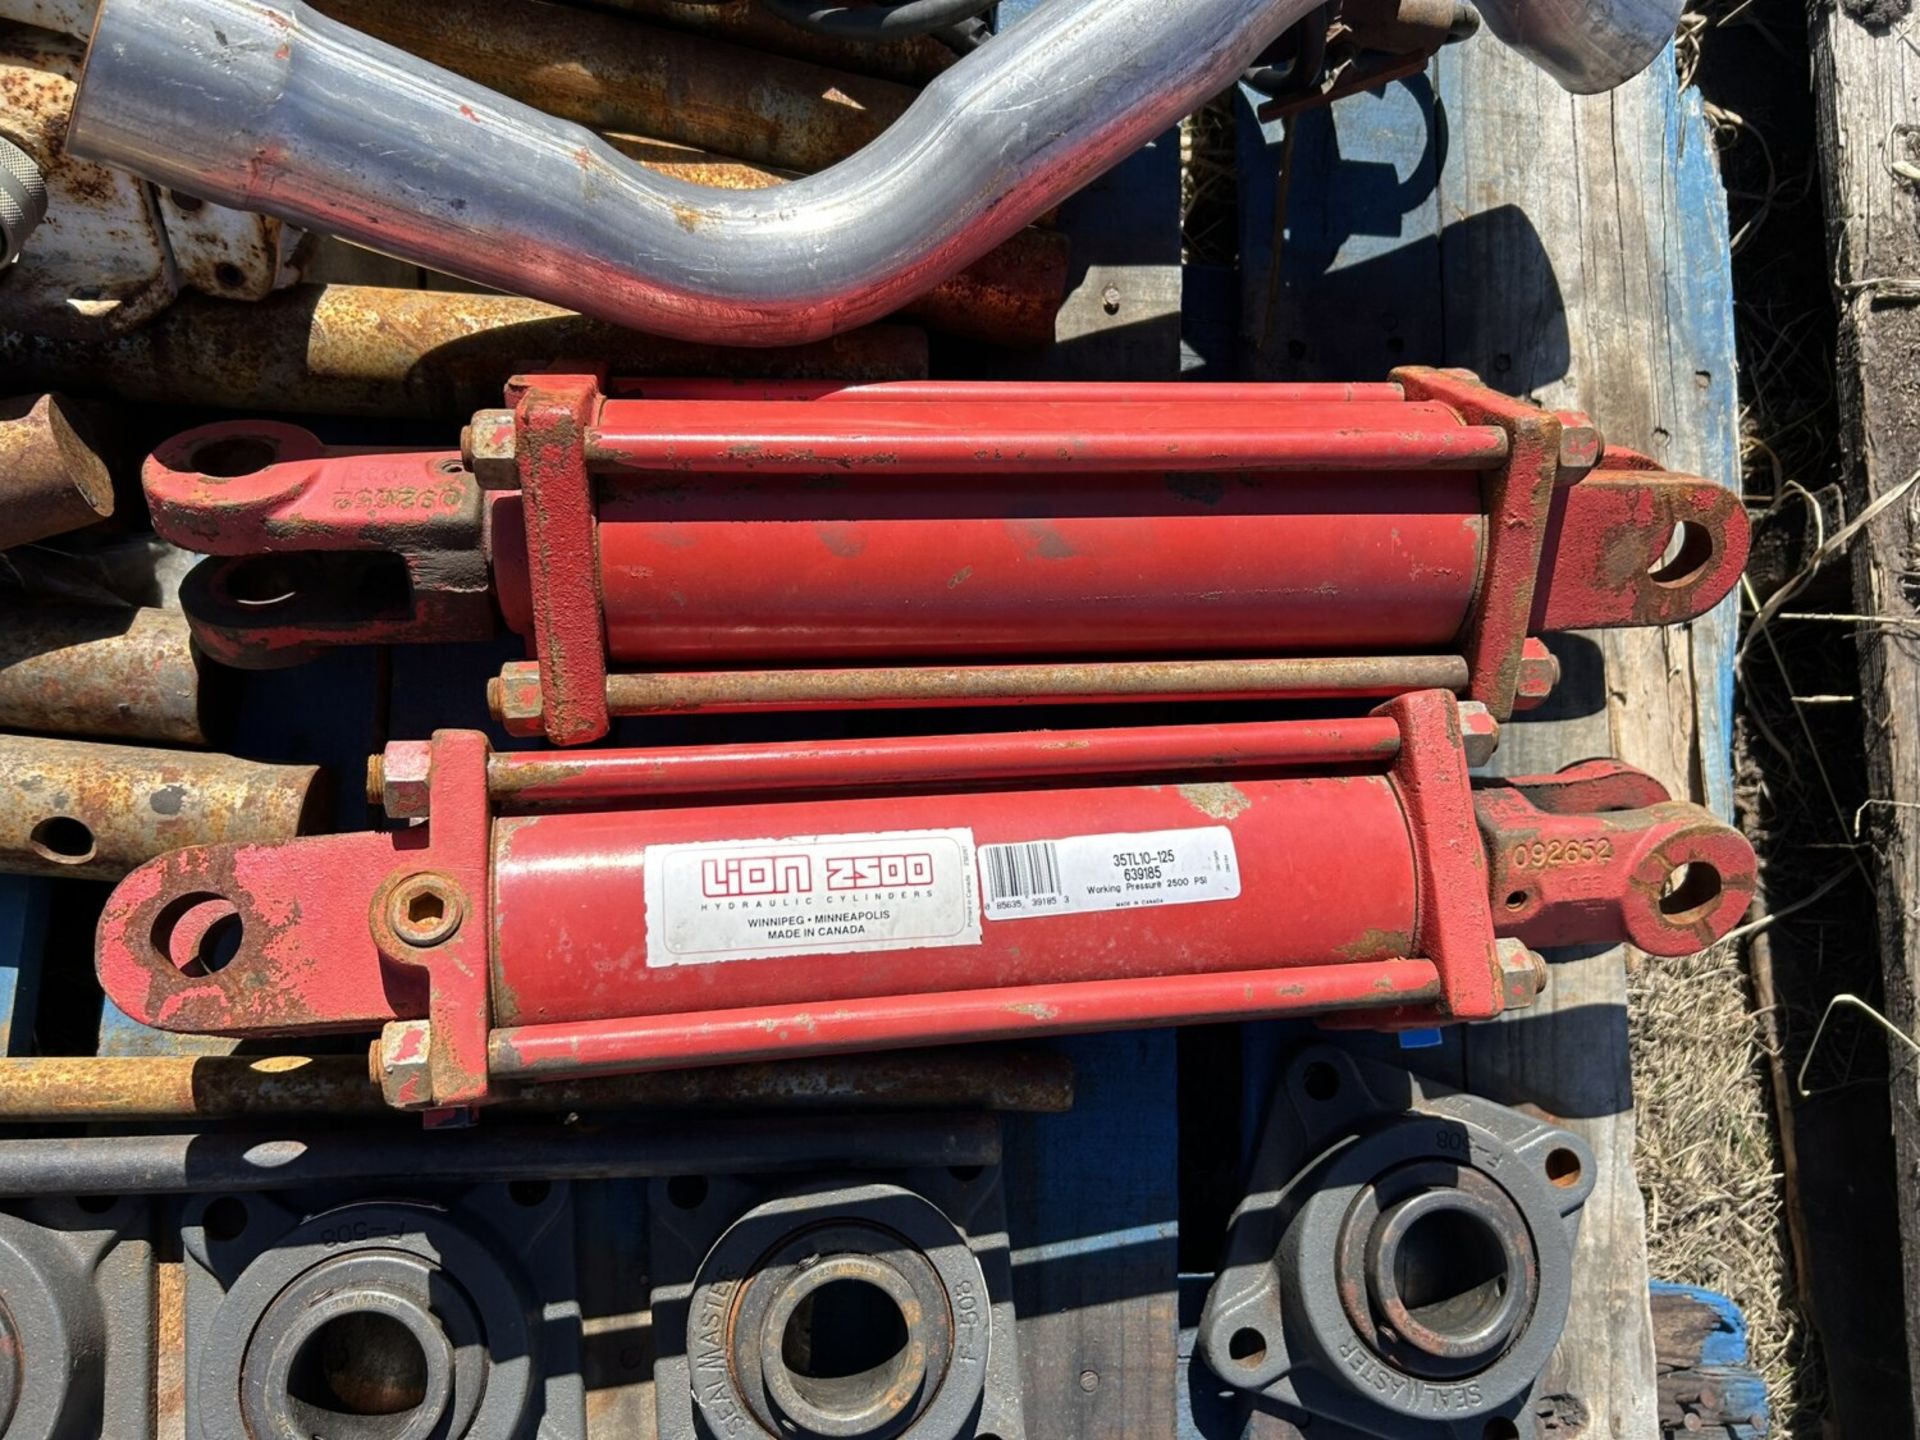 P/O MISC SHAFTING, BEARINGS, EXHAUST TUBE, 3.5"X8" HYD. RAMS, ETC. - Image 4 of 5